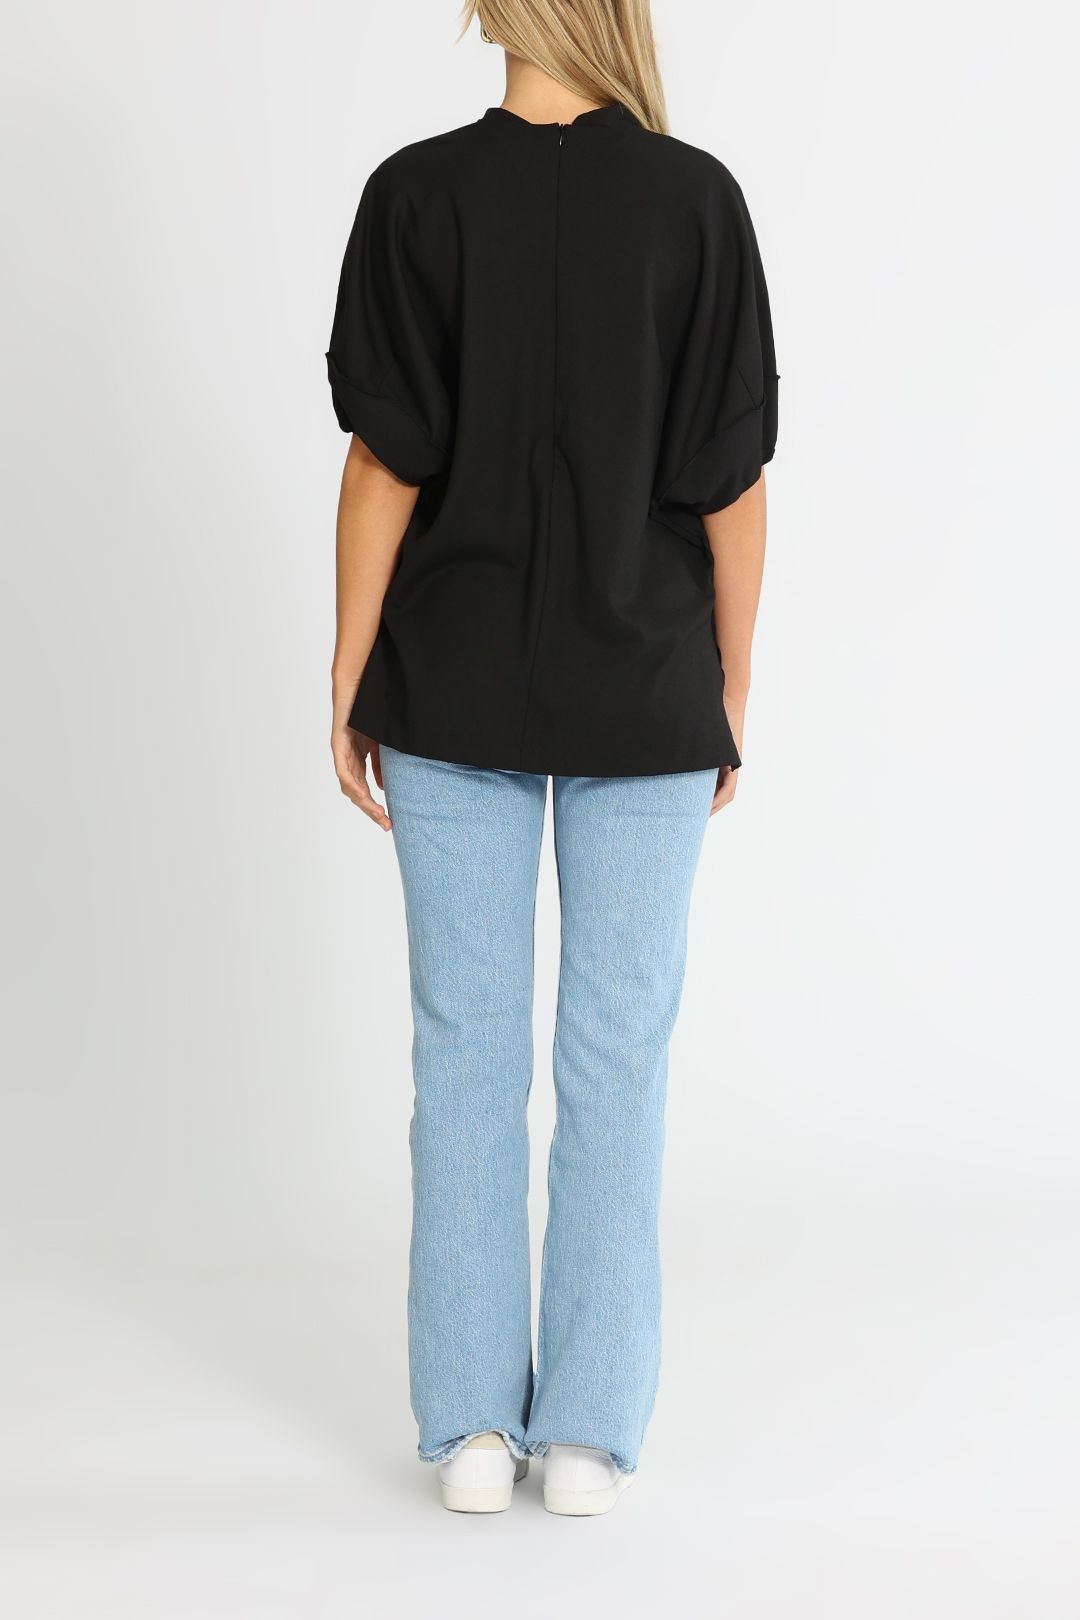 Camilla and Marc Ford Puff Sleeve Top Relaxed